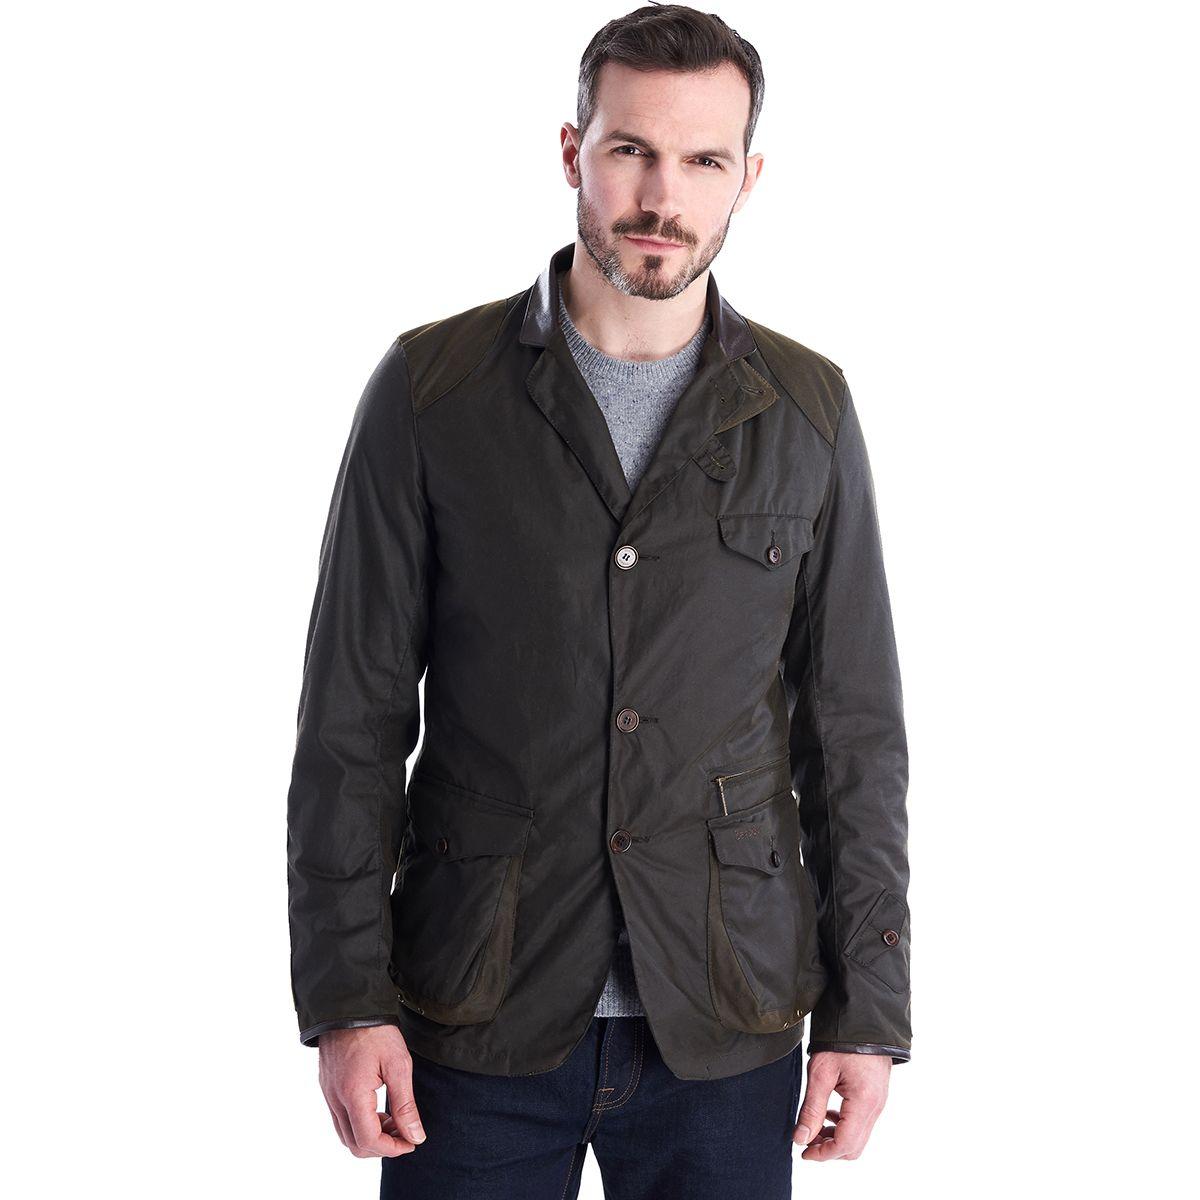 Barbour Cotton Icons Beacon Sport Jacket in Olive (Green) for Men - Lyst